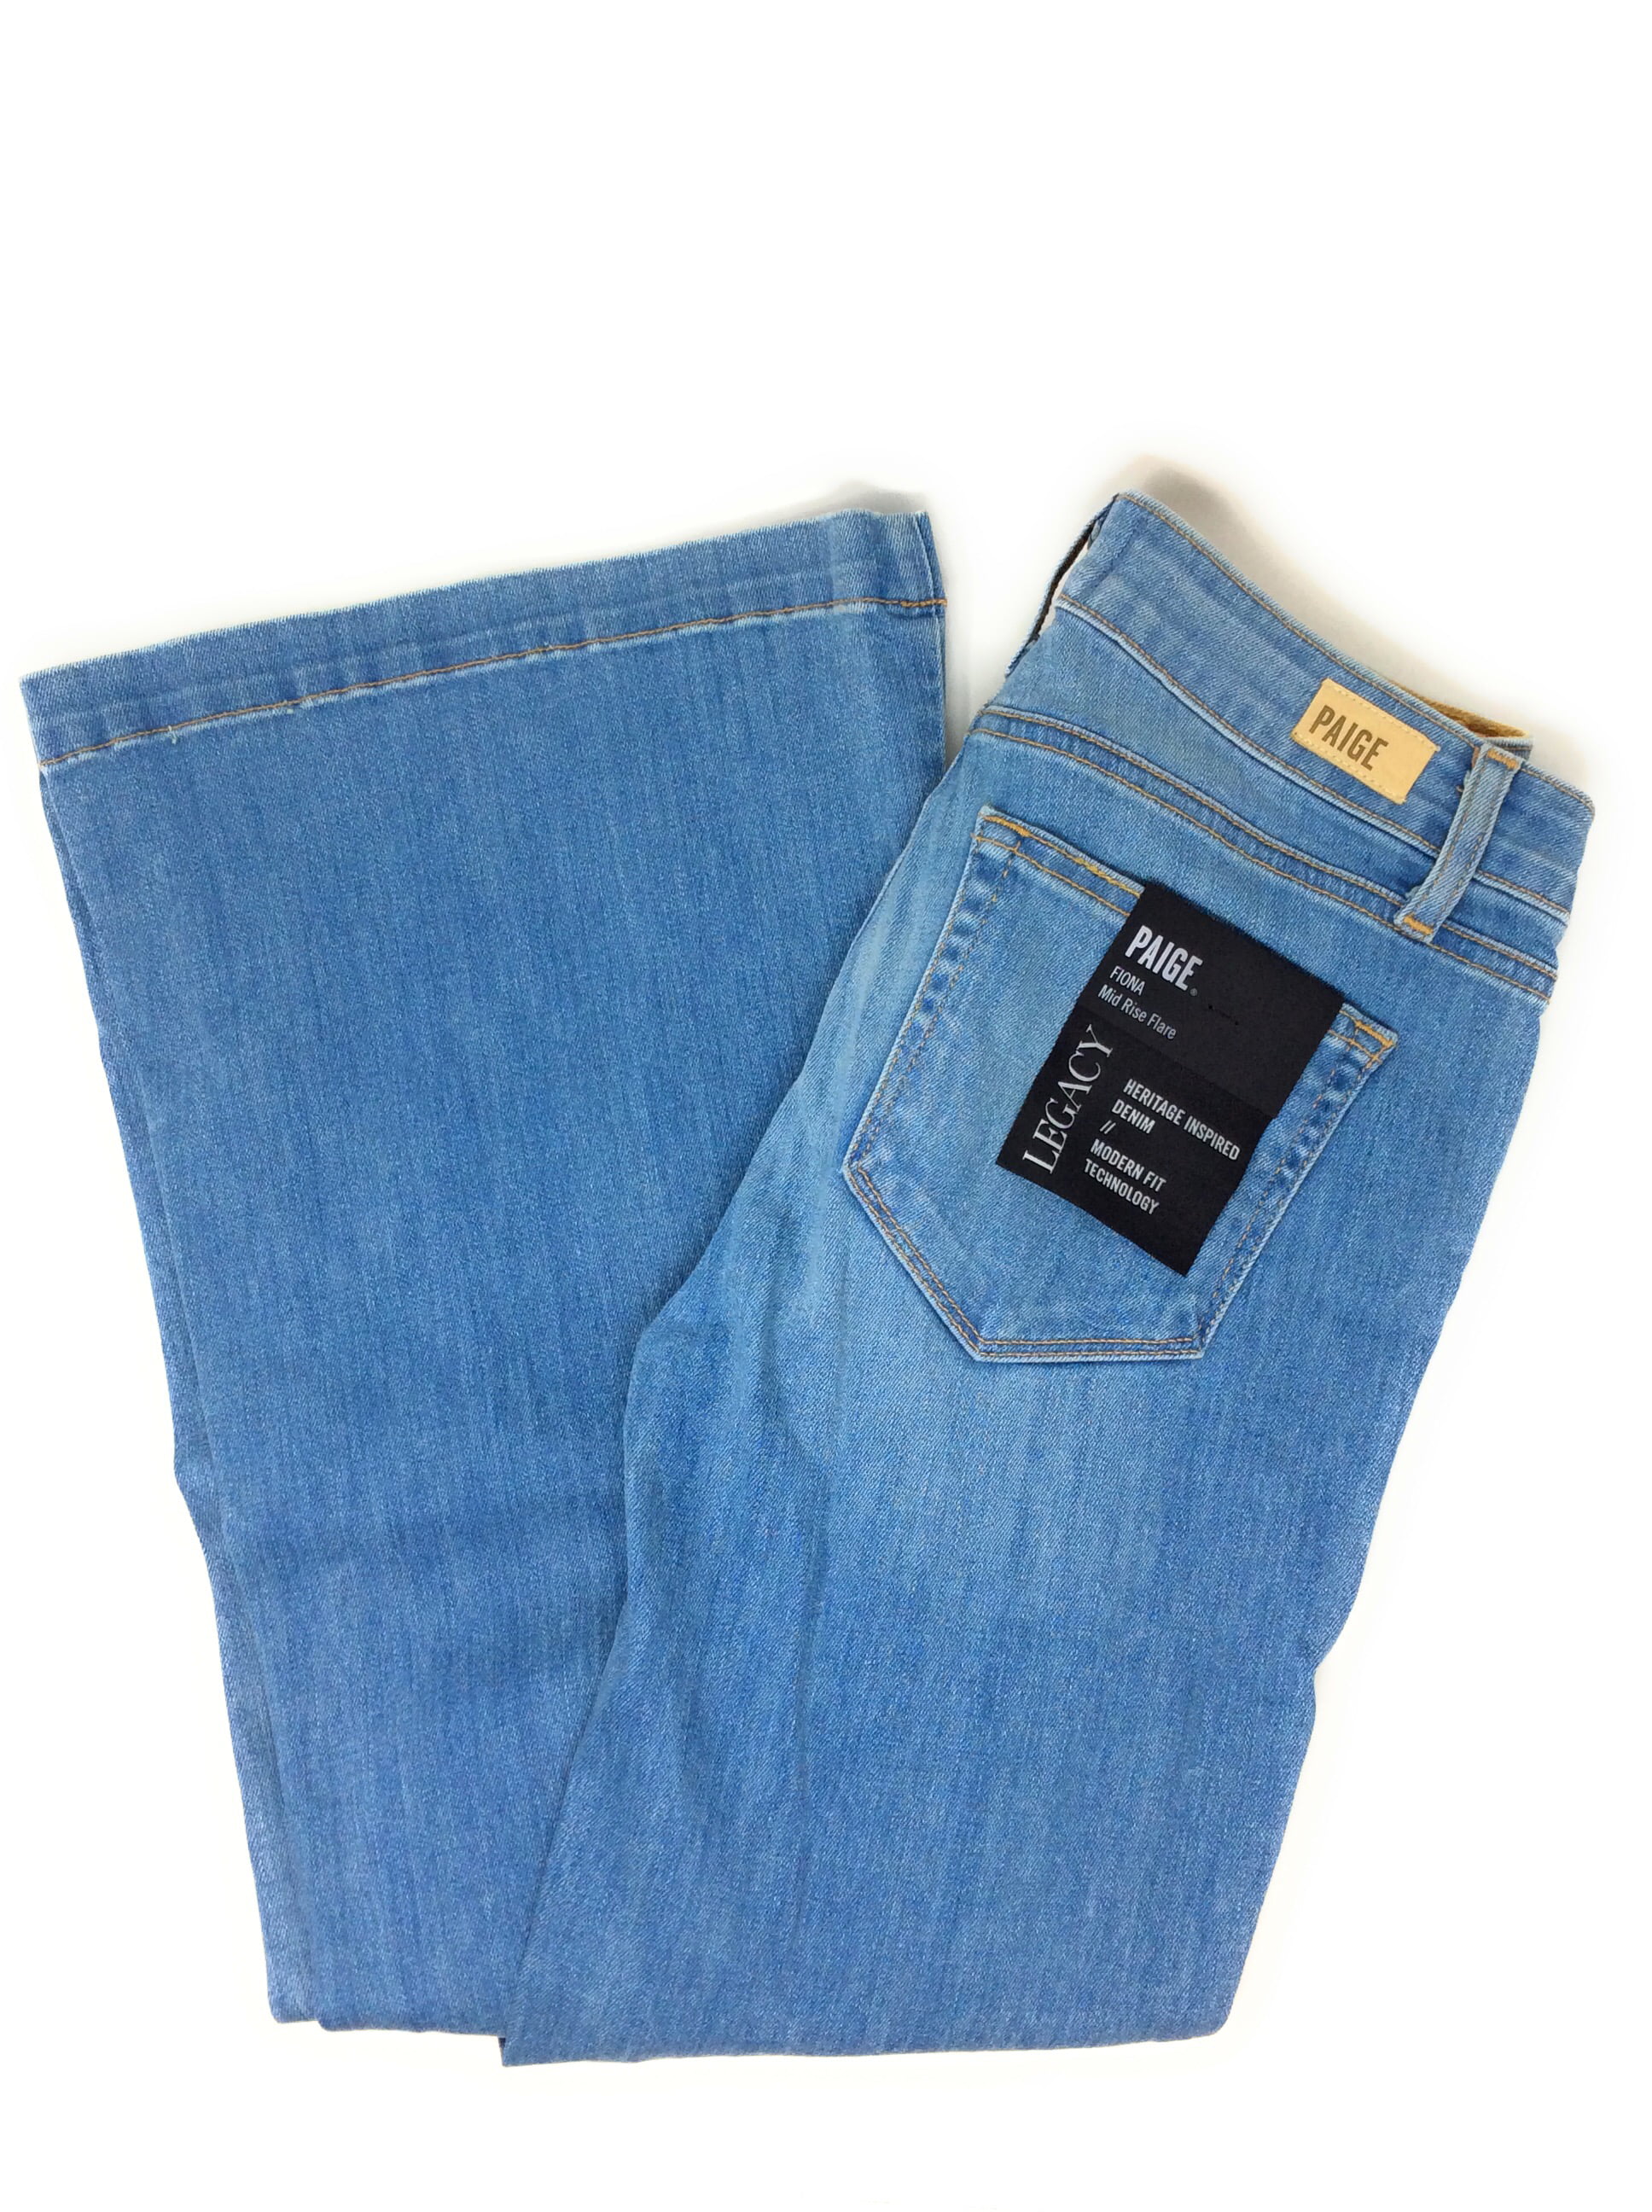 size 23 jeans in us